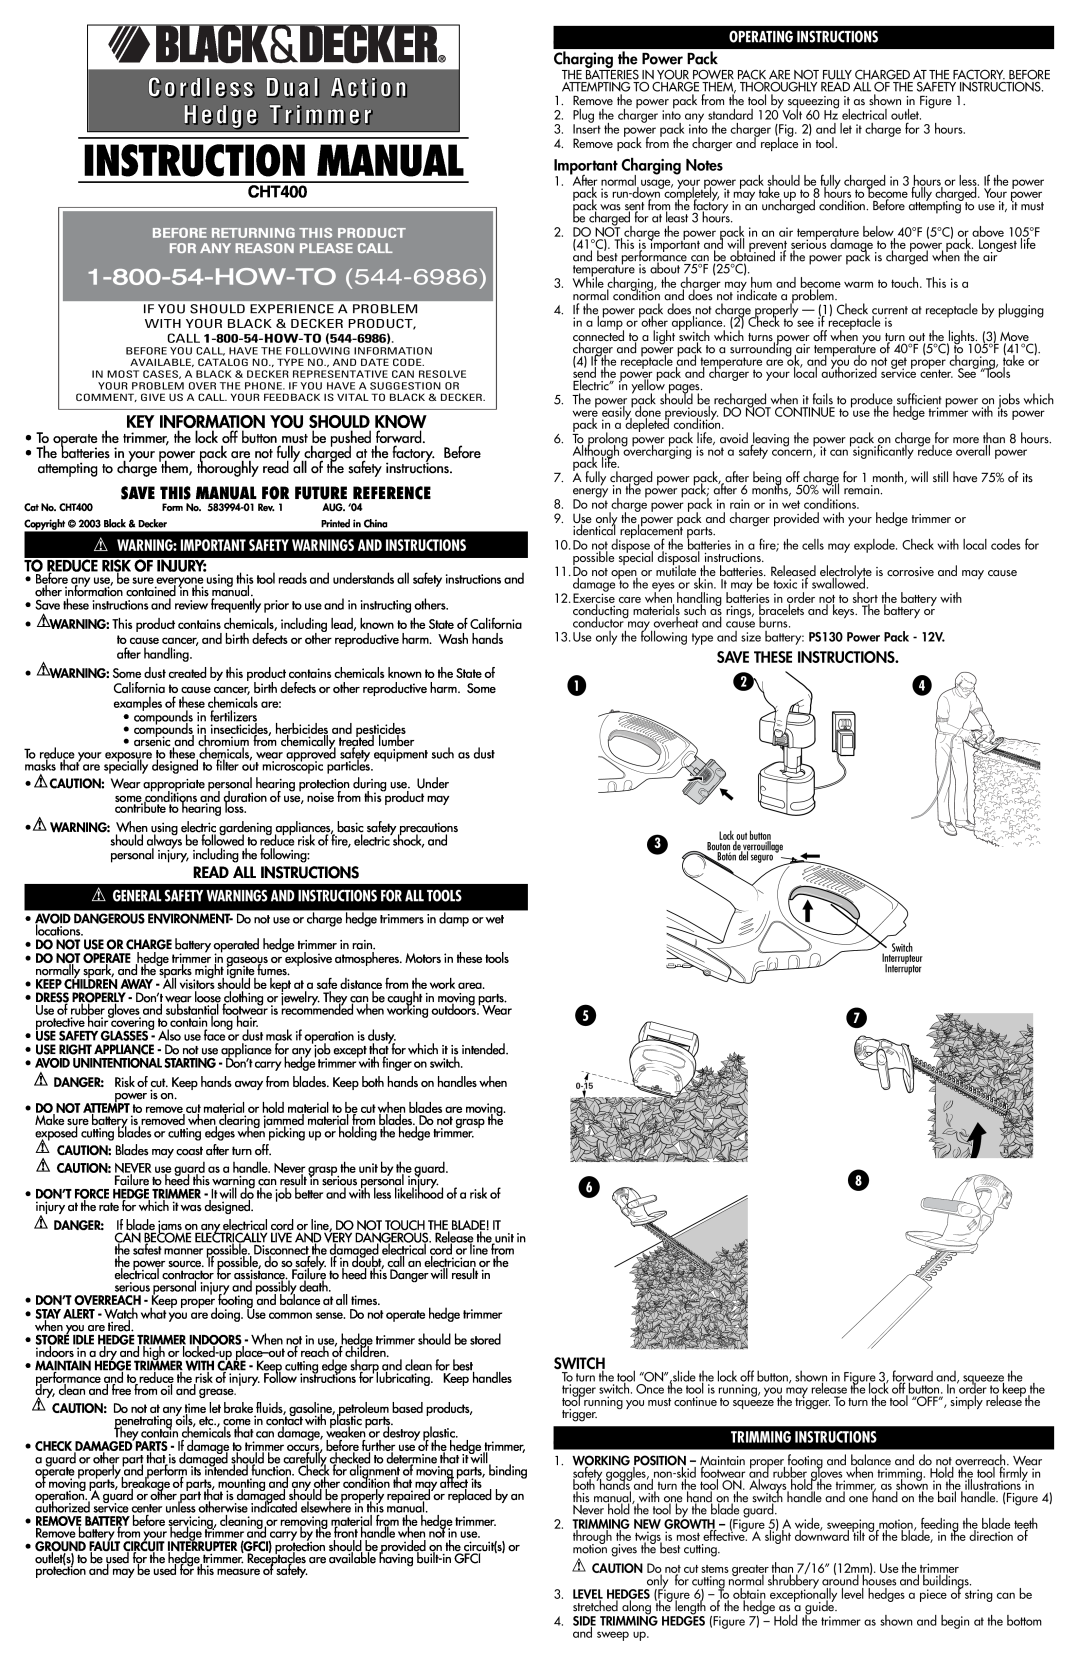 Black & Decker 583994-01 instruction manual Instruction Manual, CHT400, Key Information You Should Know, Switch, How-To 